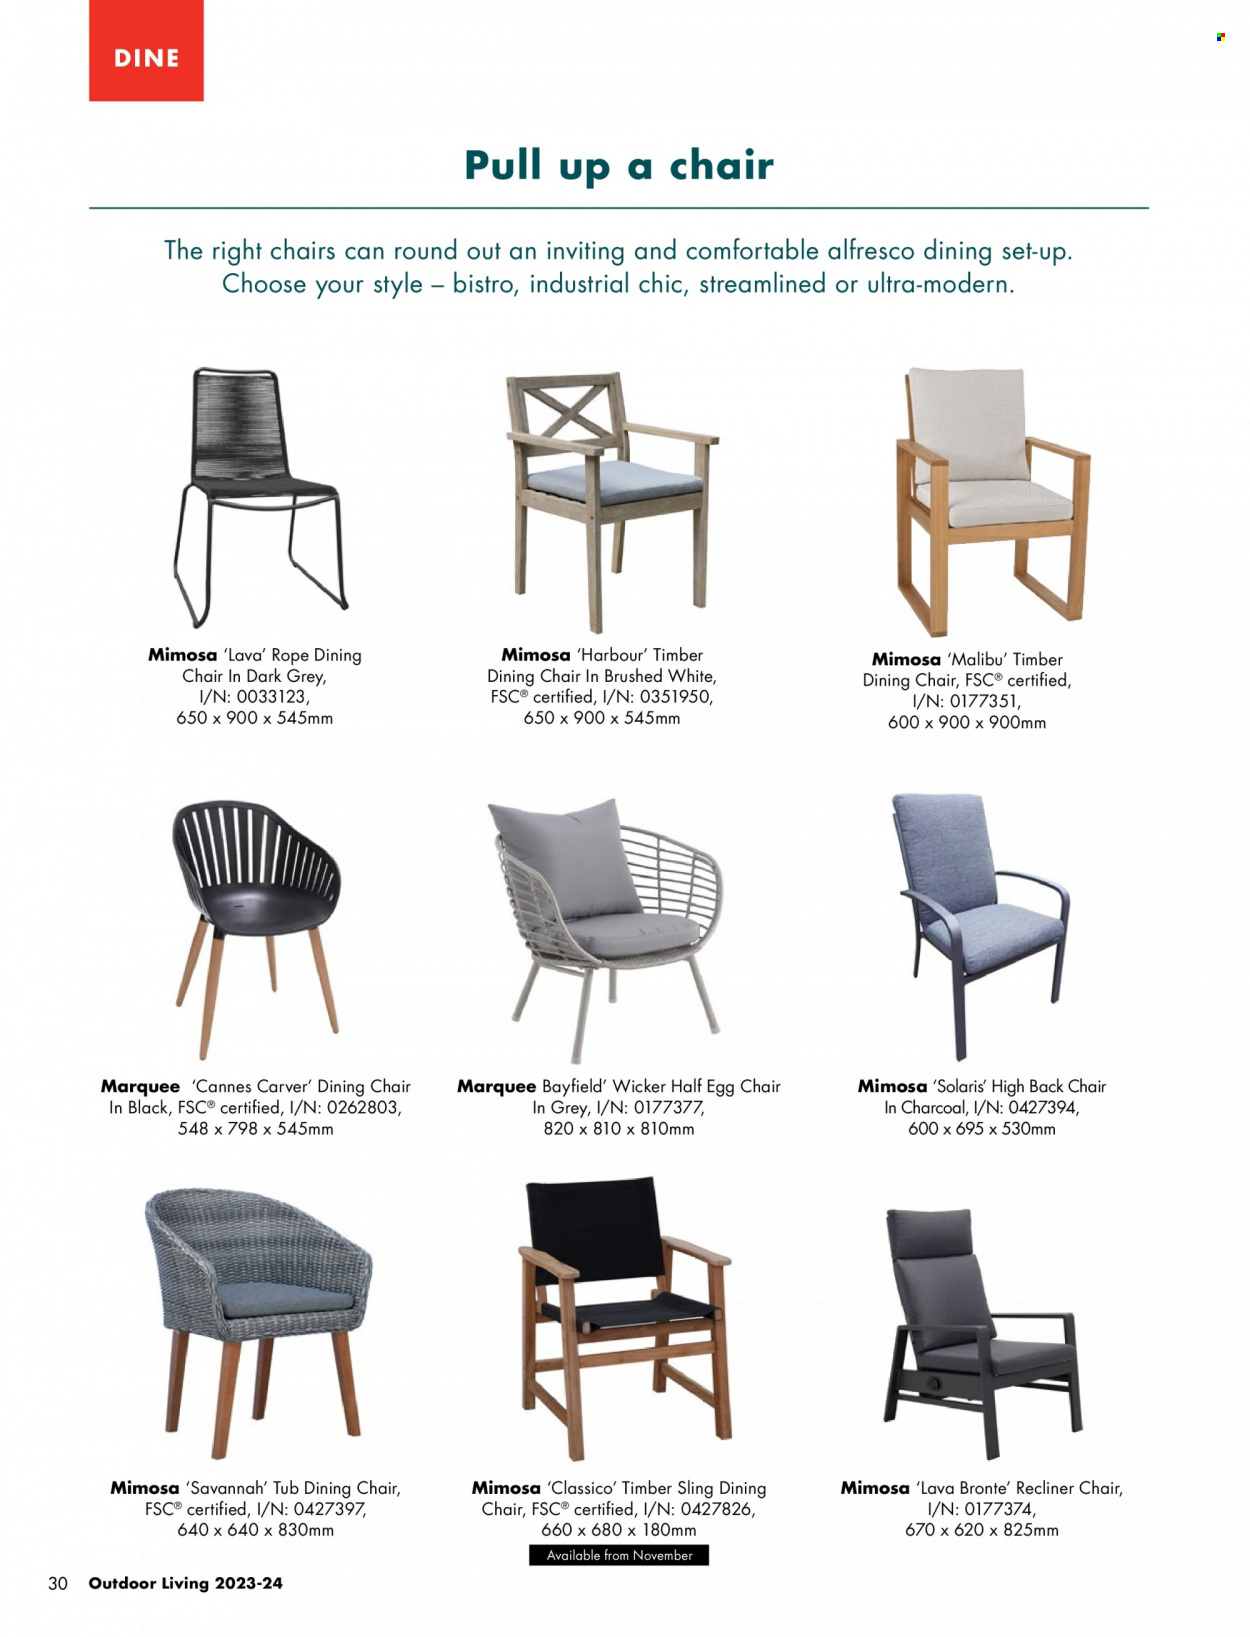 thumbnail - Bunnings Warehouse Catalogue - Sales products - dining set, dining chair, chair, recliner chair. Page 30.